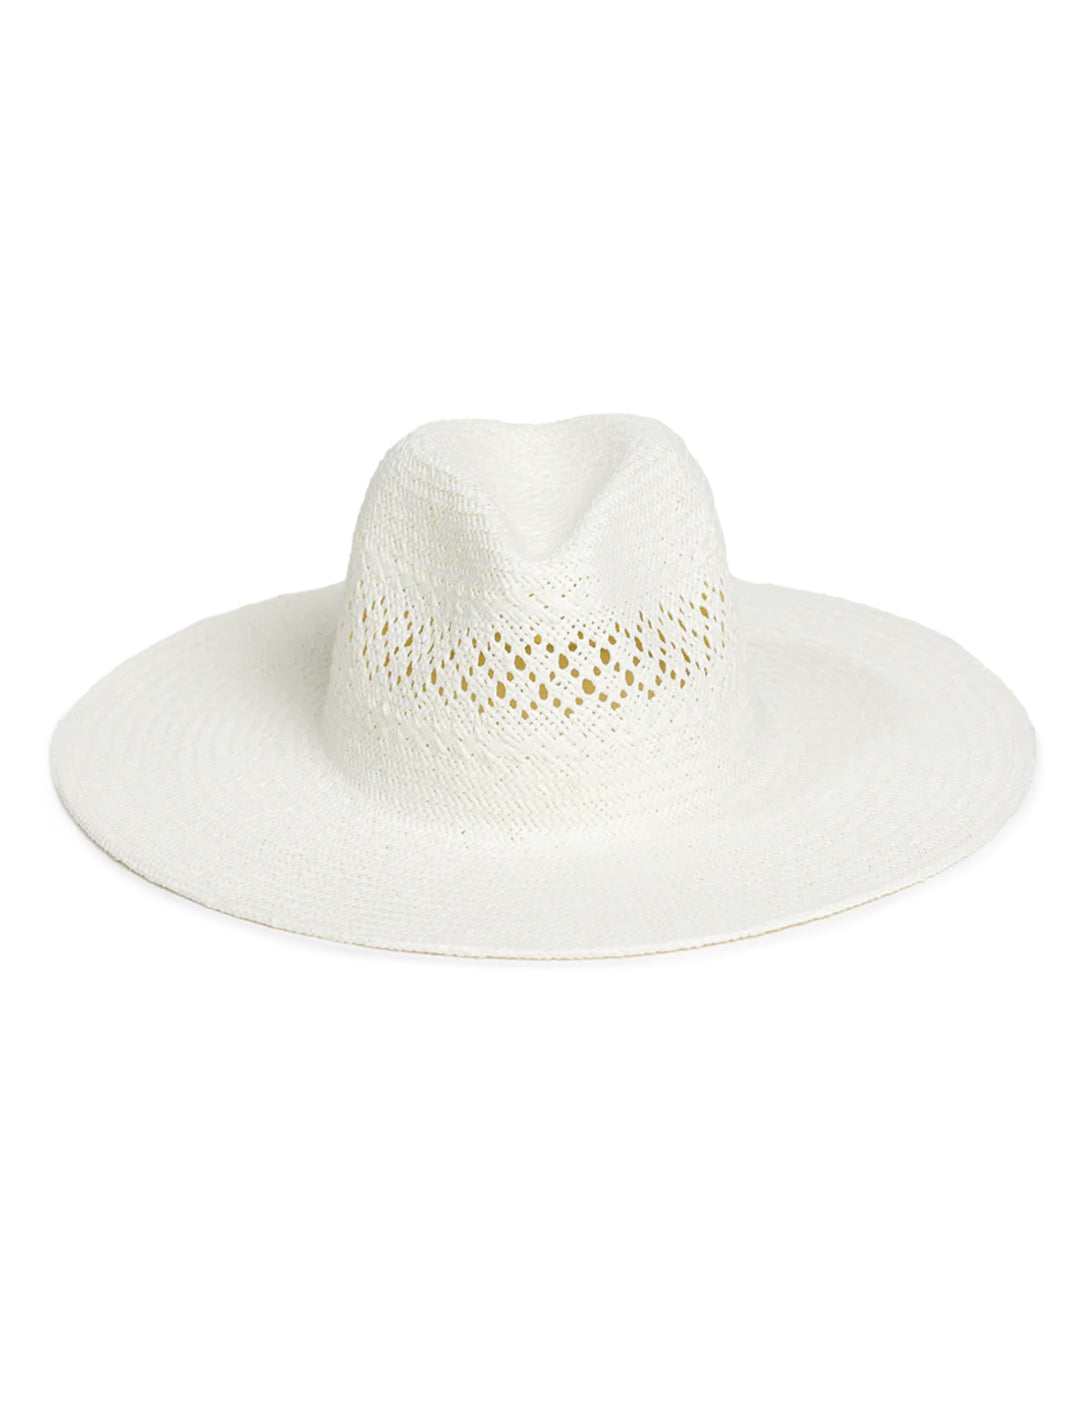 Front view of Hat Attack's luxe packable sunhat.